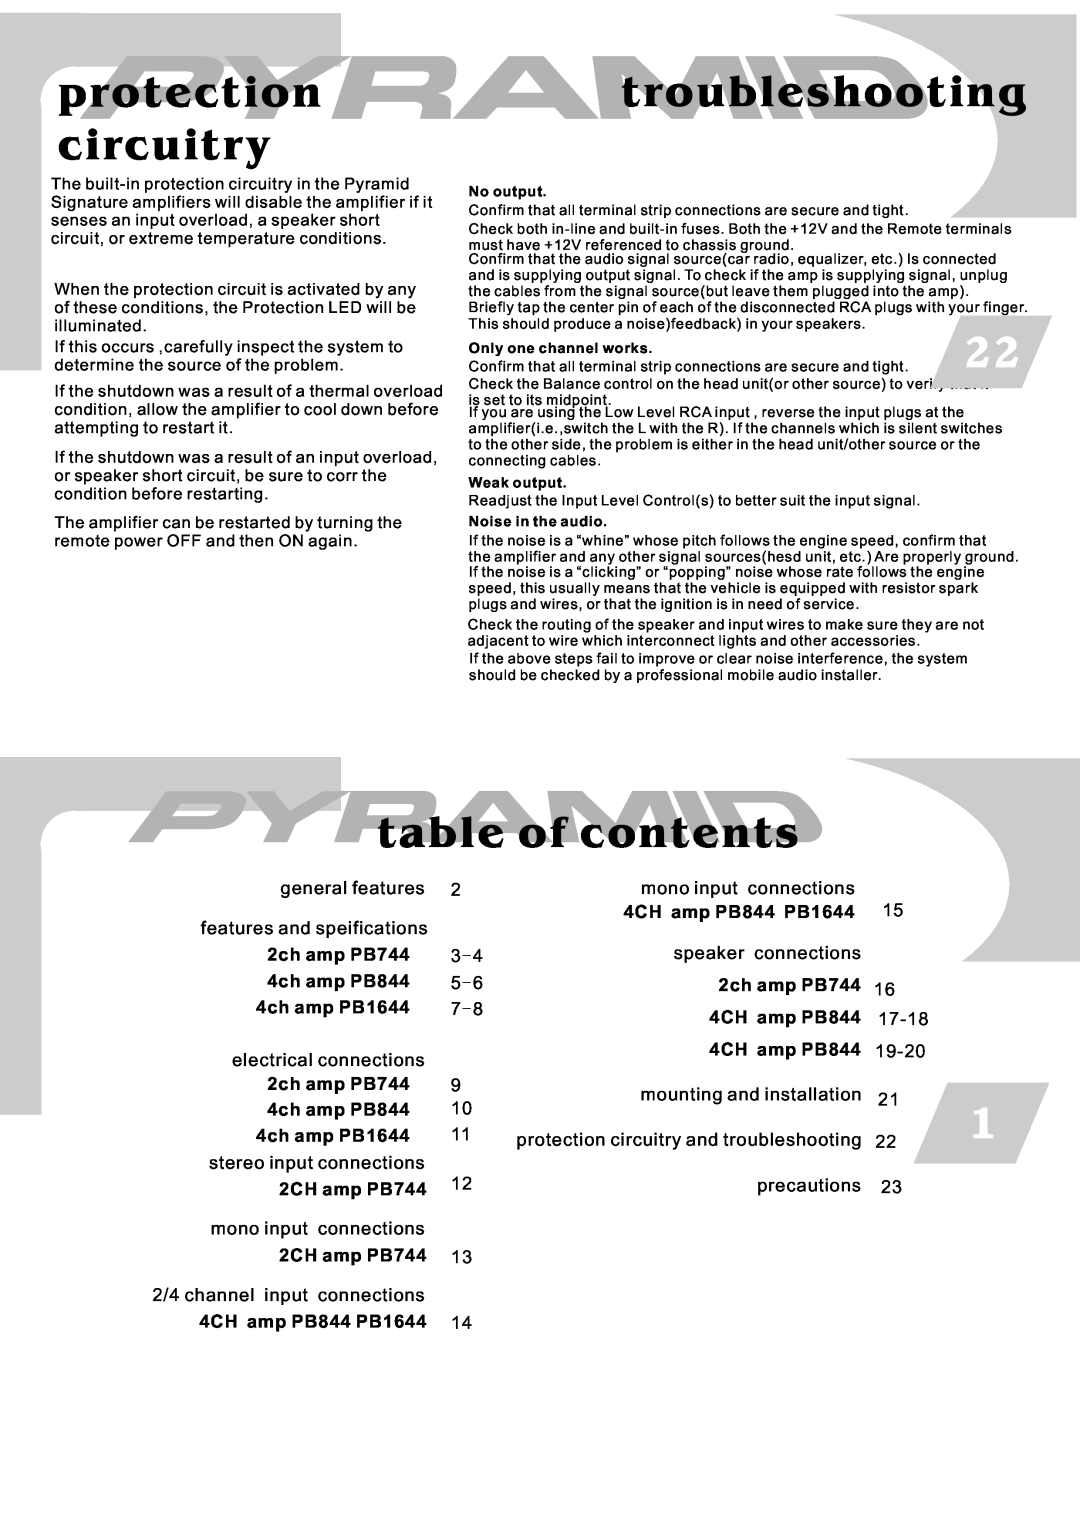 Pyramid Car Audio PB1644, PB744, PB844 warranty protection circuitry, troubleshooting, table of contents 